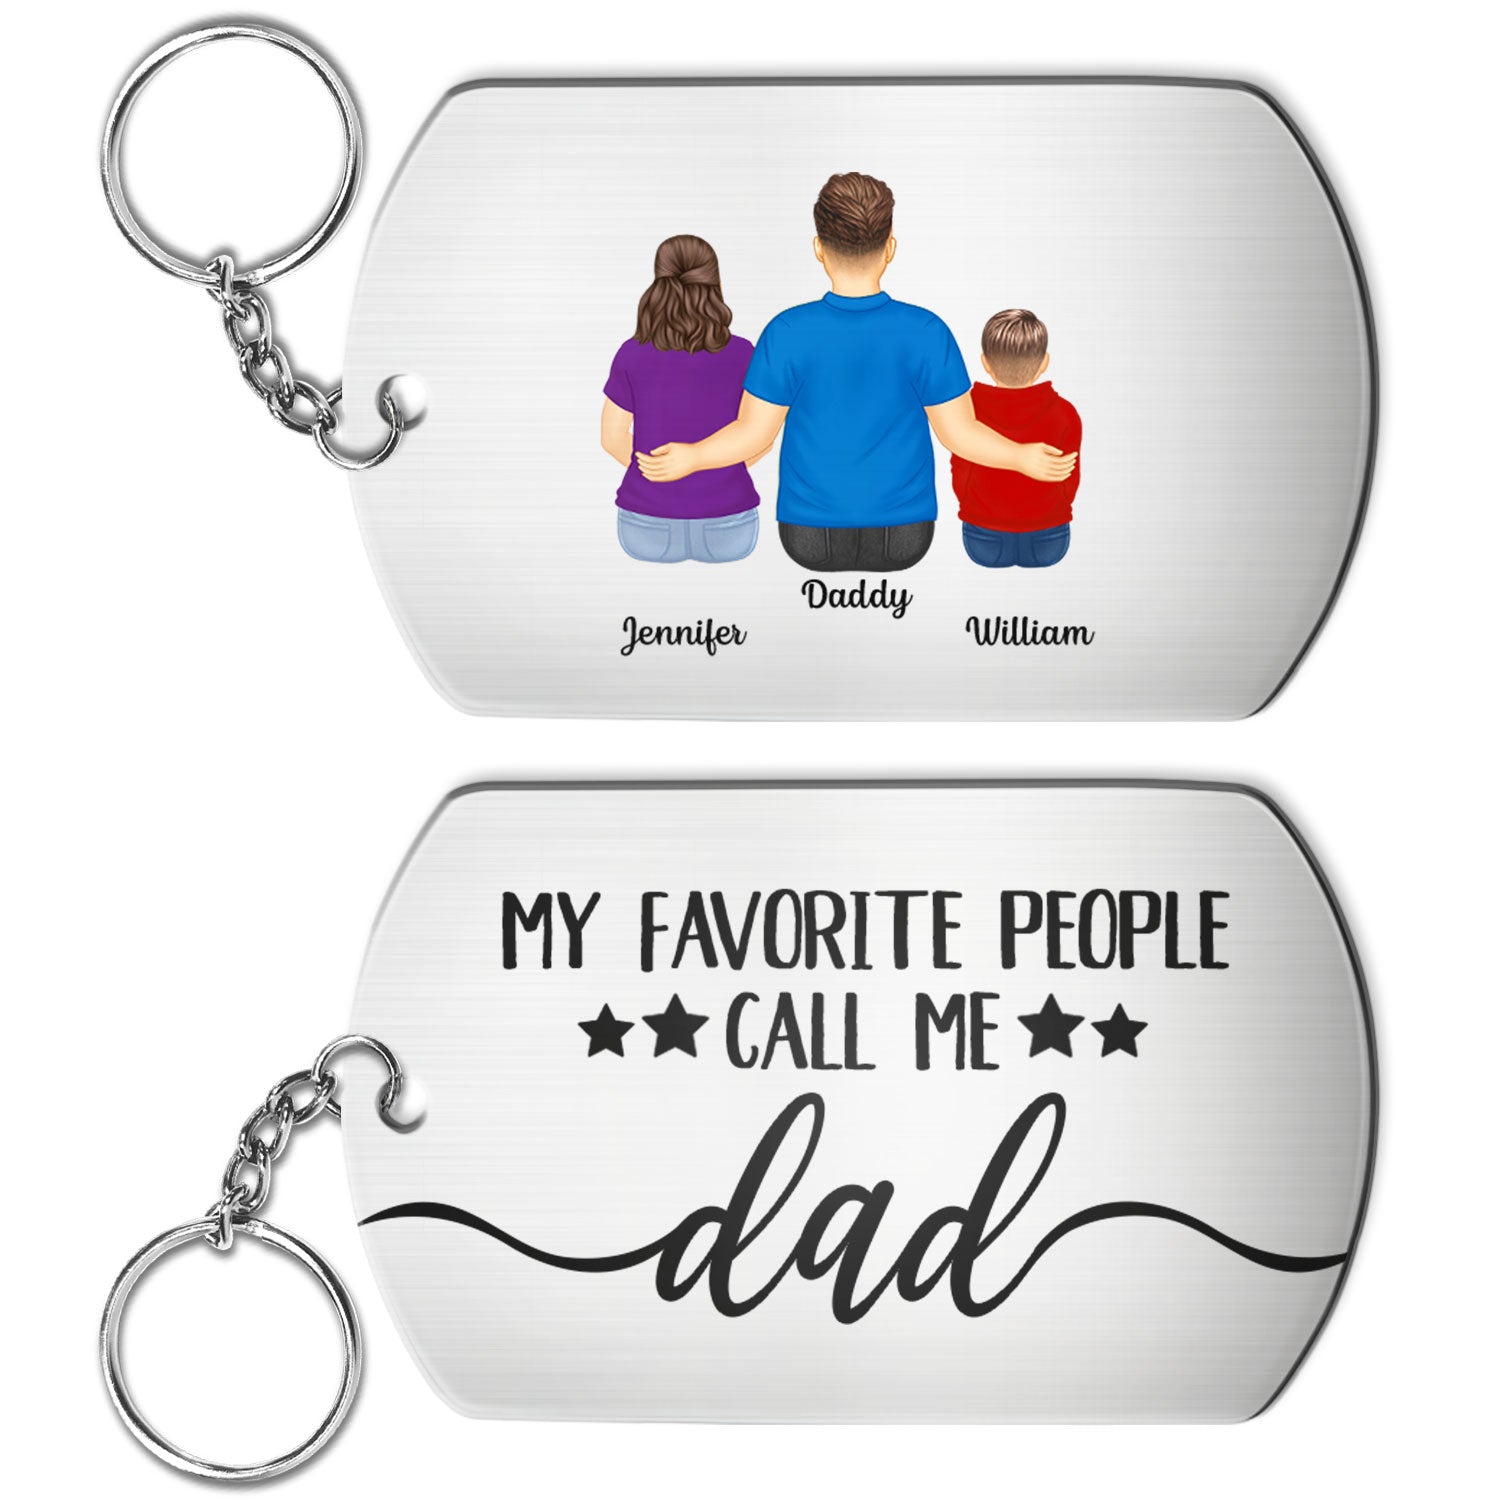 My Favorite People Call Me - Gift For Dad, Grandpa - Personalized Aluminum Keychain